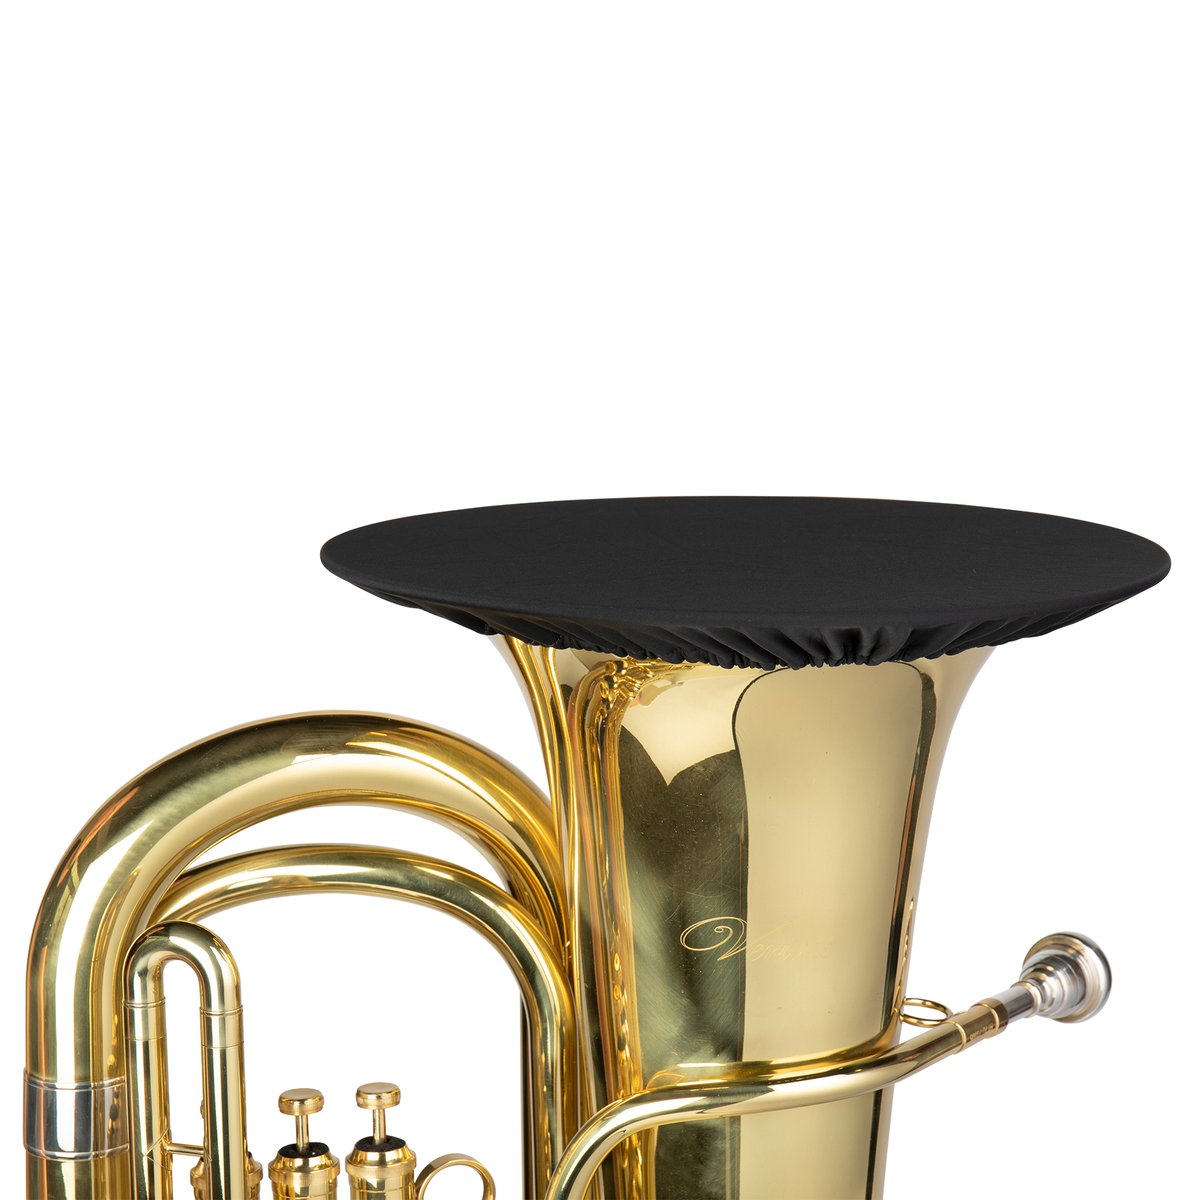 Double-Layer Wind Instrument Cover for Bell Sizes Ranging from 13.5 to 15.5-Inches (Black Color)